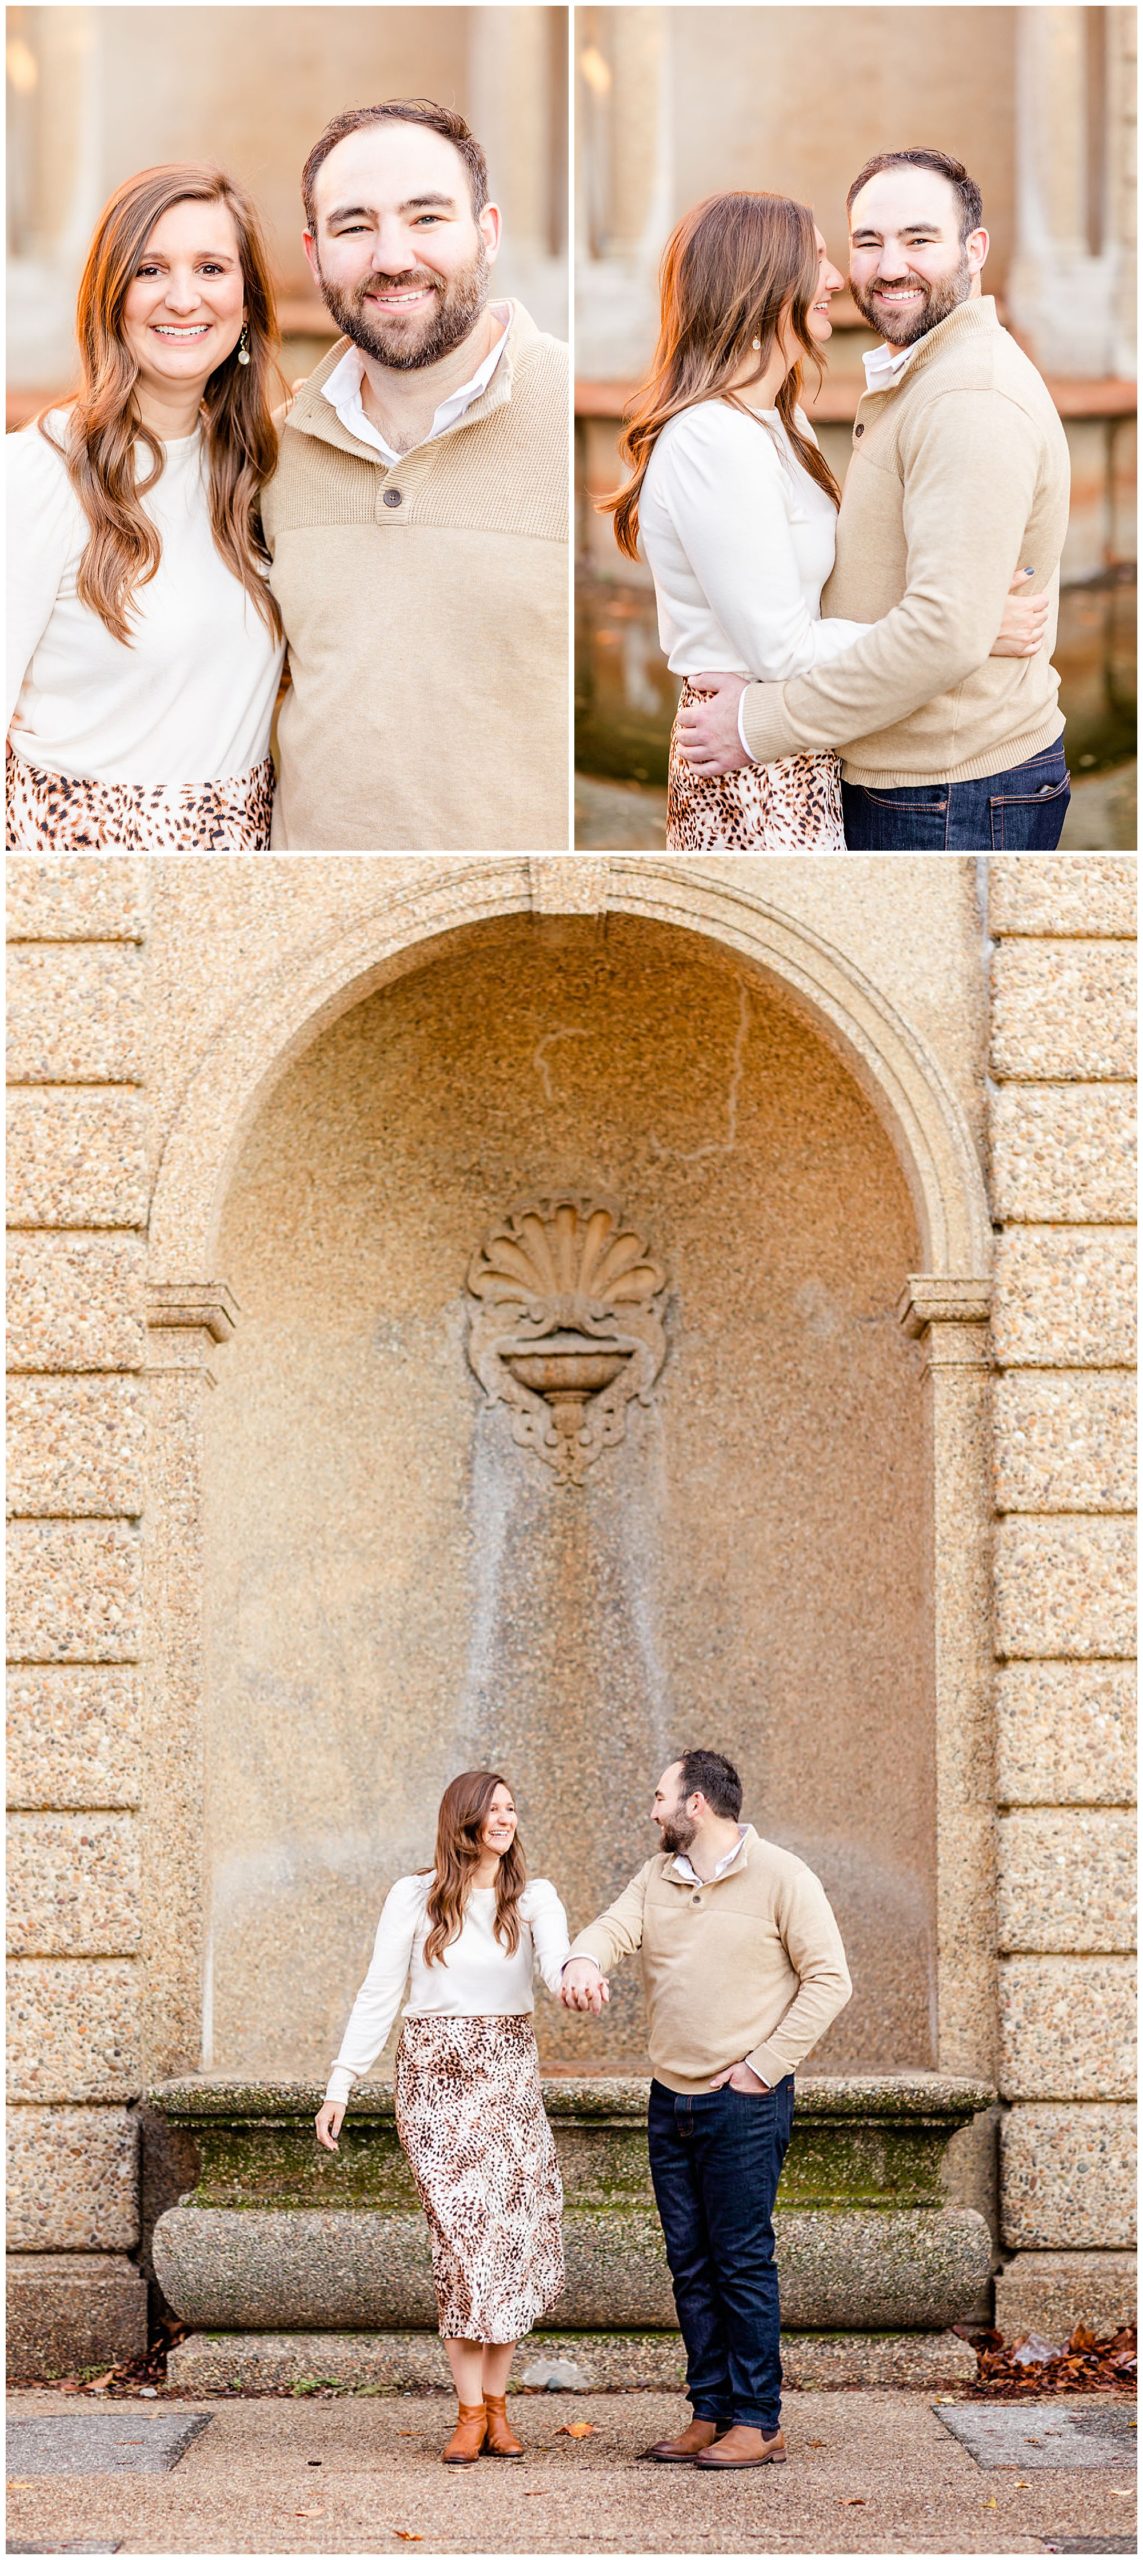 Meridian Hill Park engagement session, Meridian Hill Park DC, DC engagement photography, DC engagement photos, DC engagement session, DC engagement photographer, DC proposal photographer, DC wedding photographer, autumn engagement photos, Rachel E.H. Photography, couple in front of fountain, couple smiling, couple holding hands